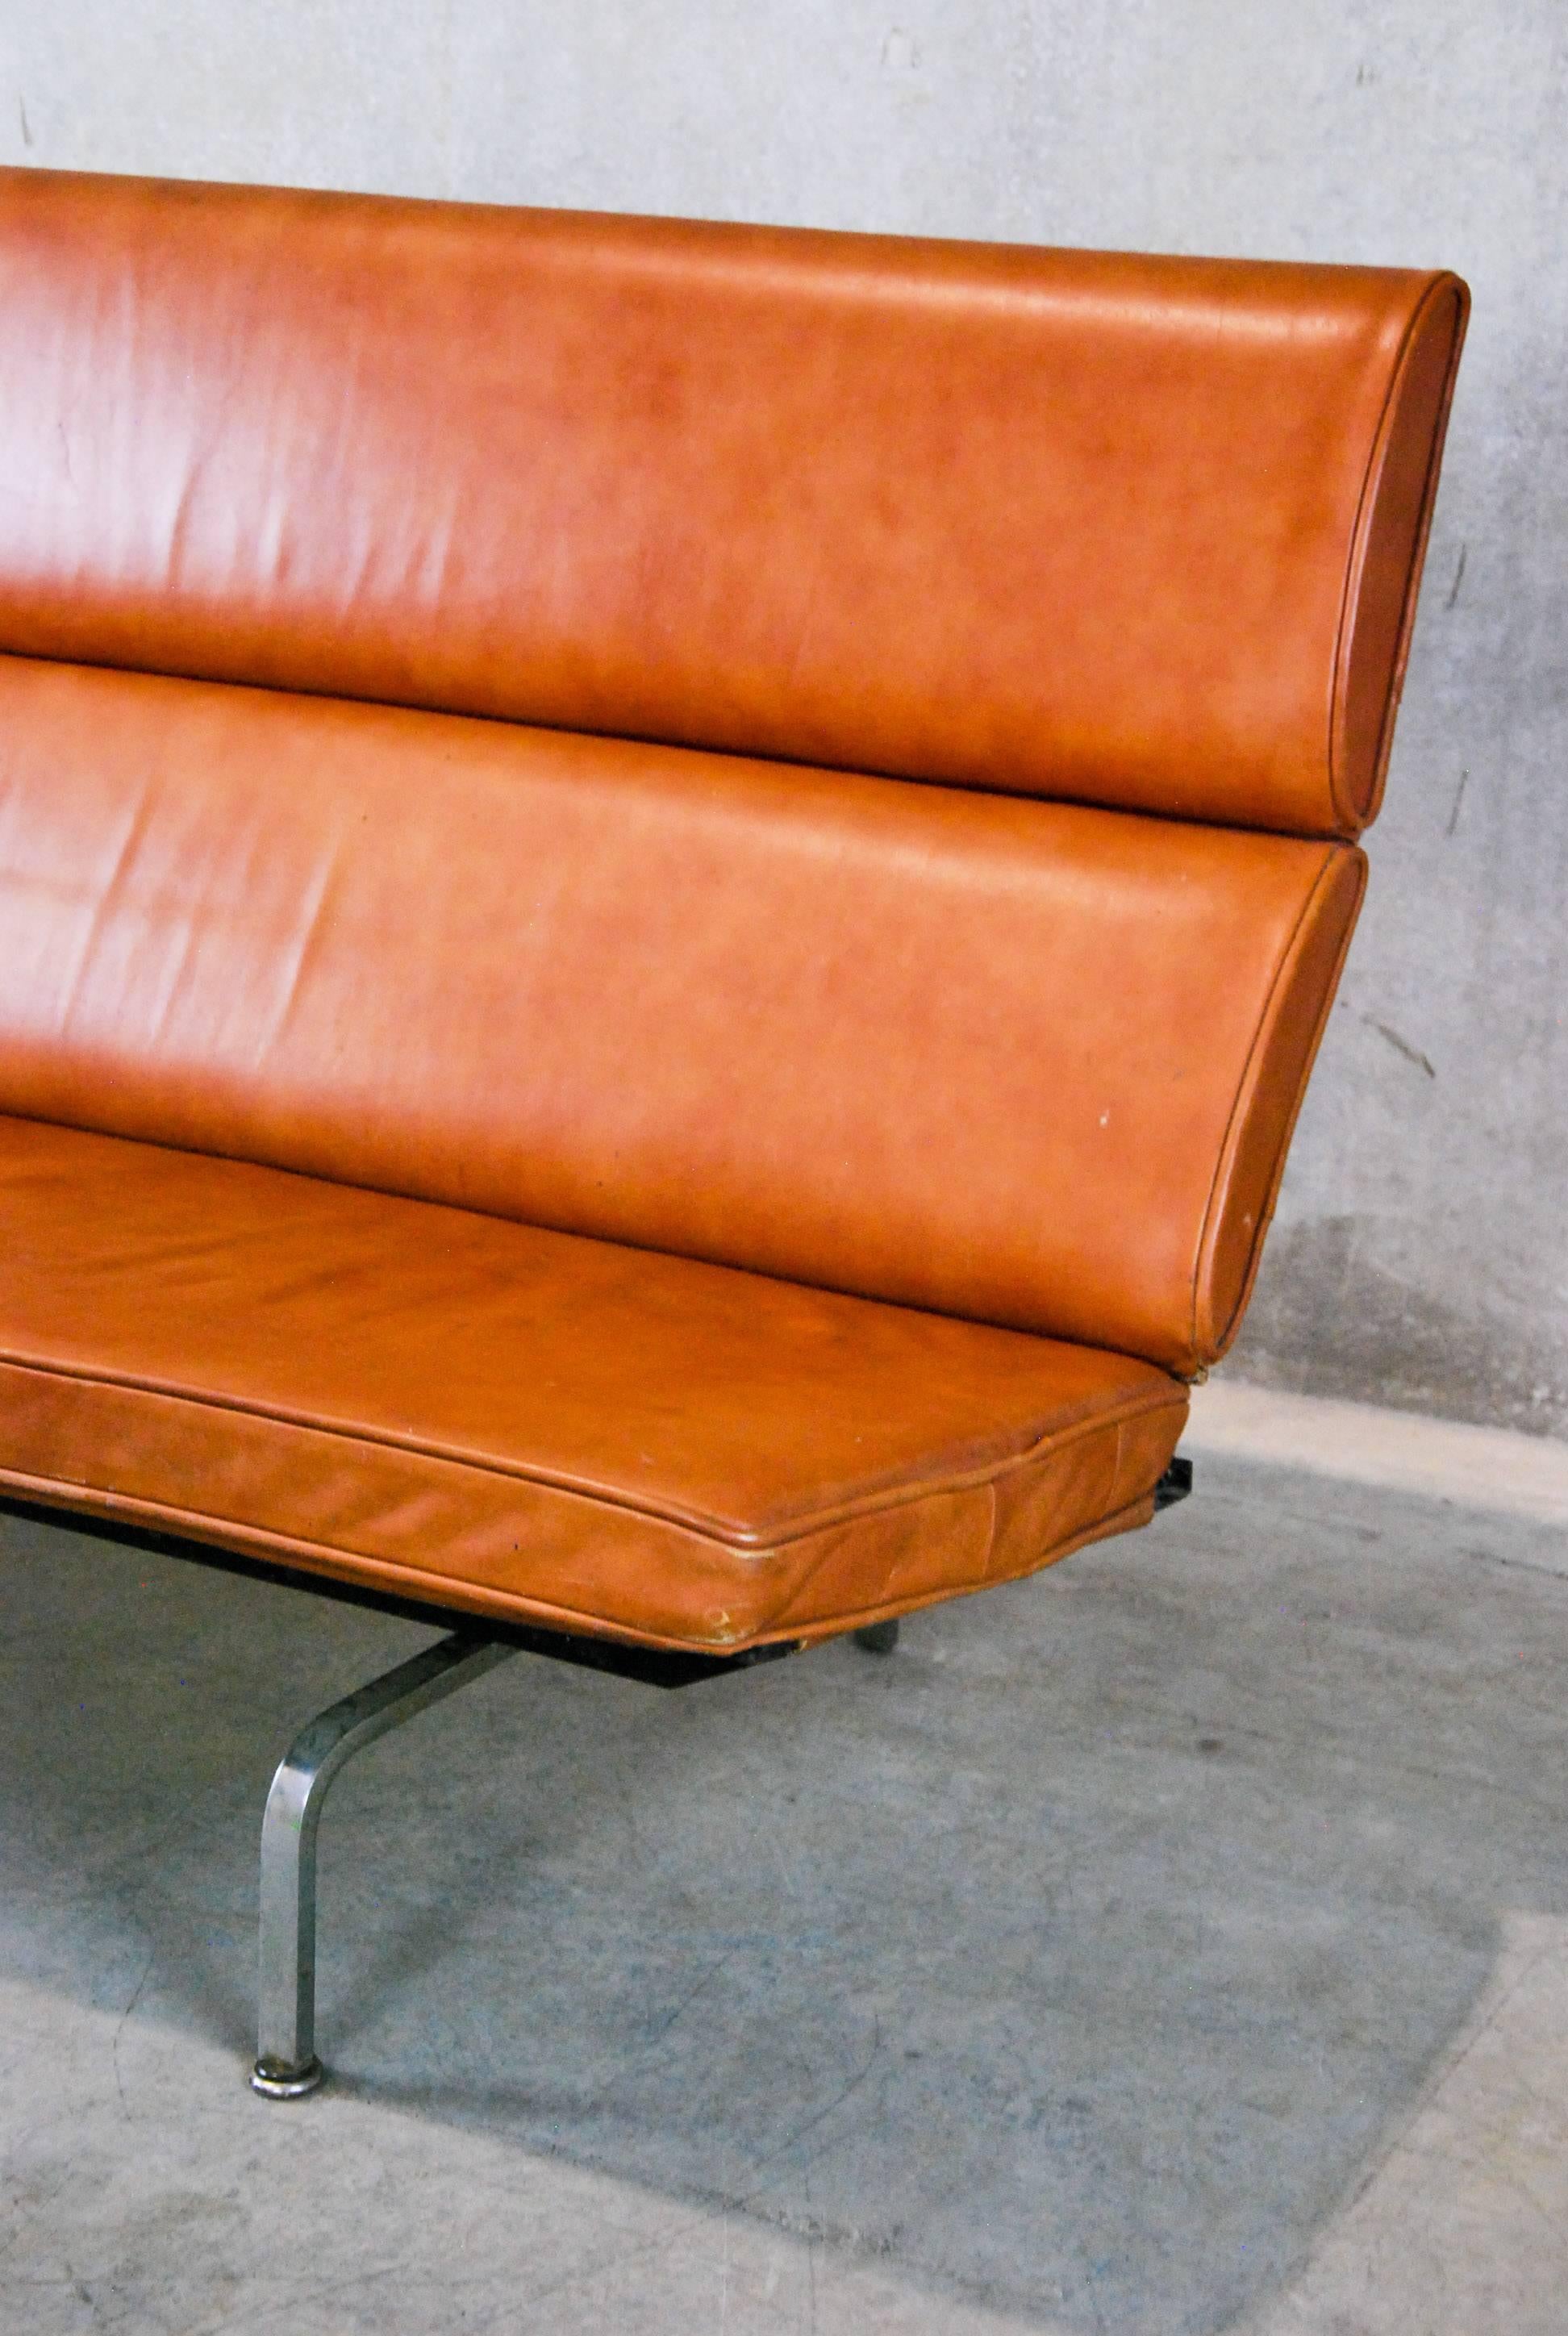 Designed by Charles and Ray Eames in the 1940s, this leather and chrome, fold-down version of the Compact Sofa was made by Herman Miller in 1958. It has its original, anti-sag springs. Sourced from a private collection in Seattle. 

The Eames sofa